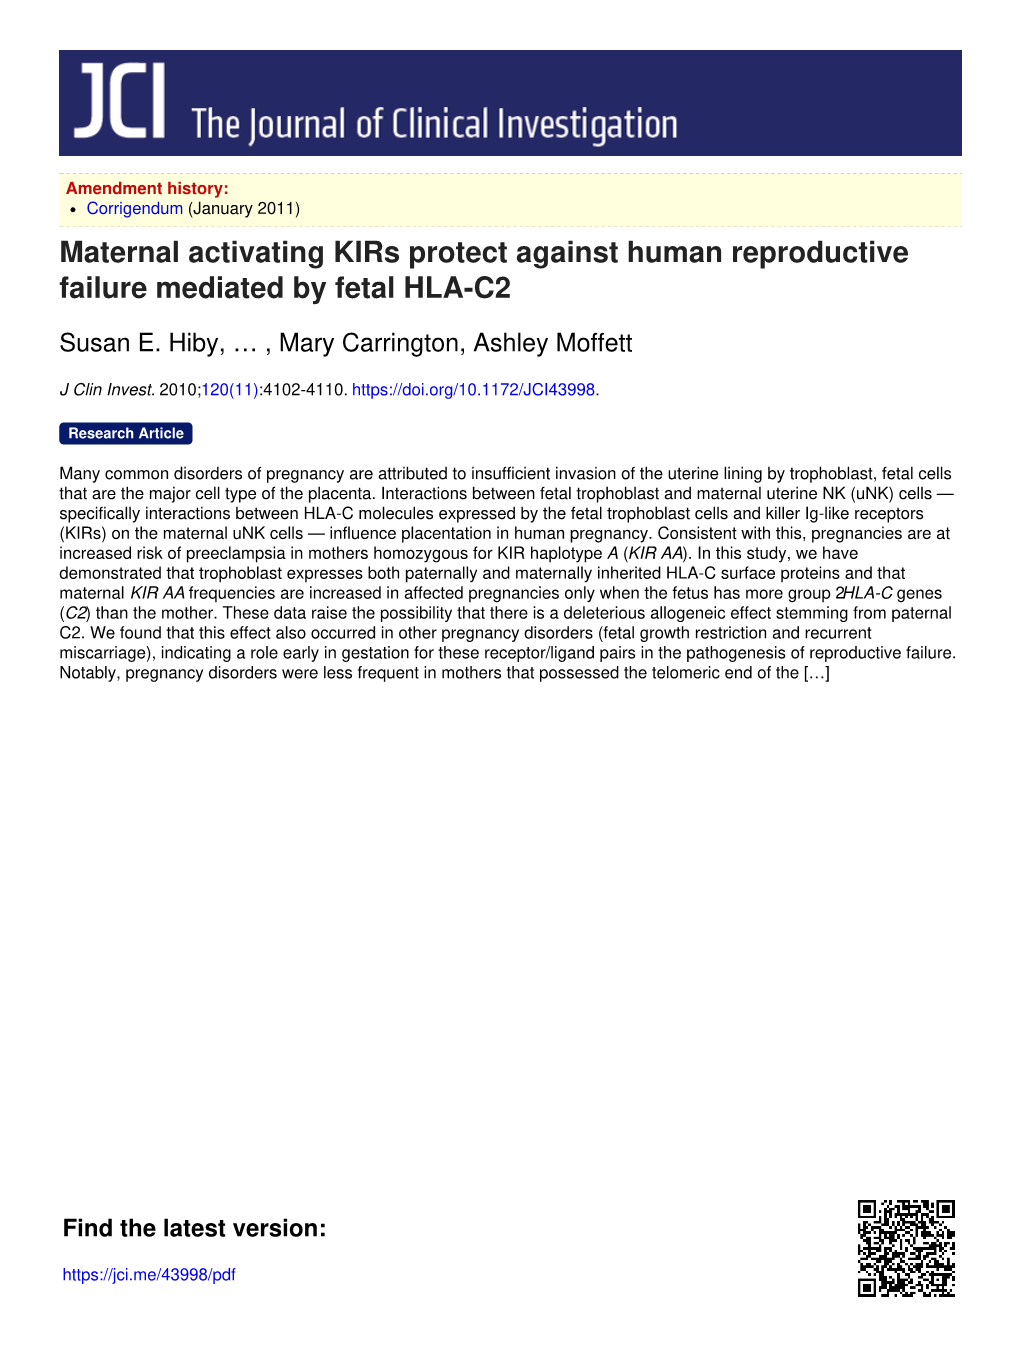 Maternal Activating Kirs Protect Against Human Reproductive Failure Mediated by Fetal HLA-C2